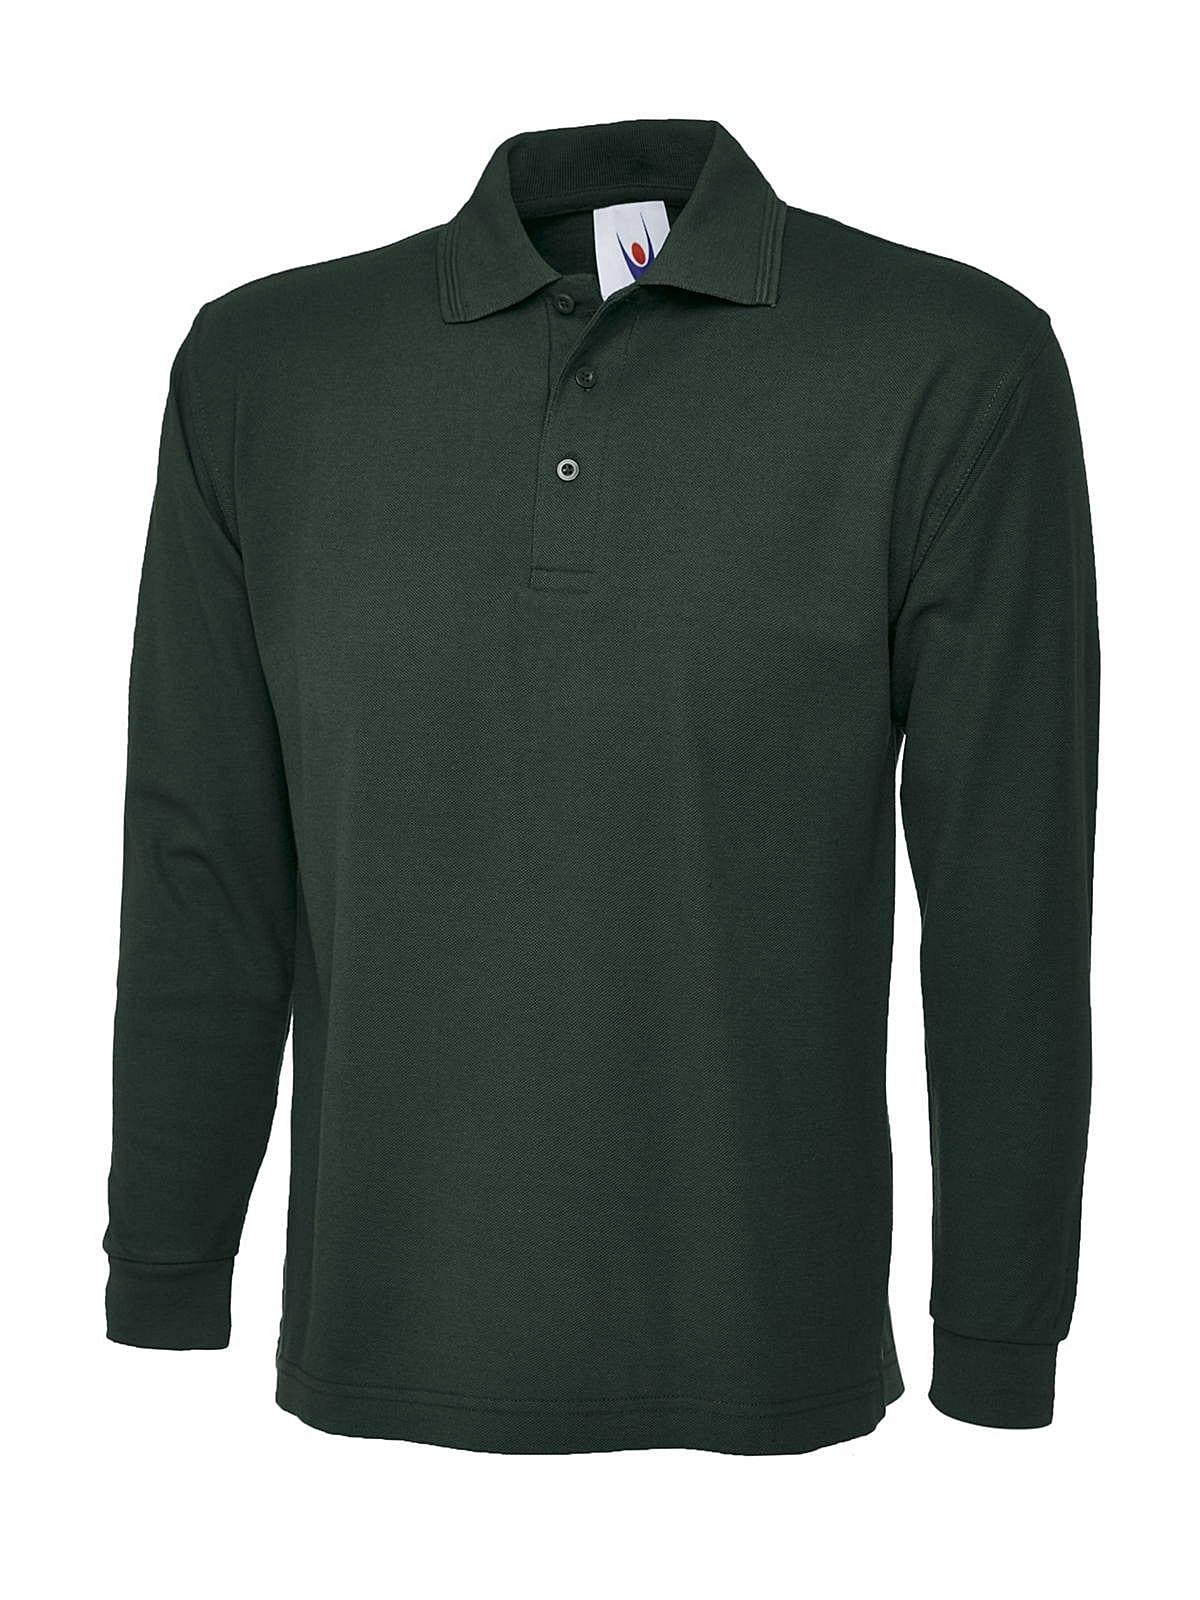 Uneek 220GSM Long-Sleeve Polo Shirt in Bottle Green (Product Code: UC113)